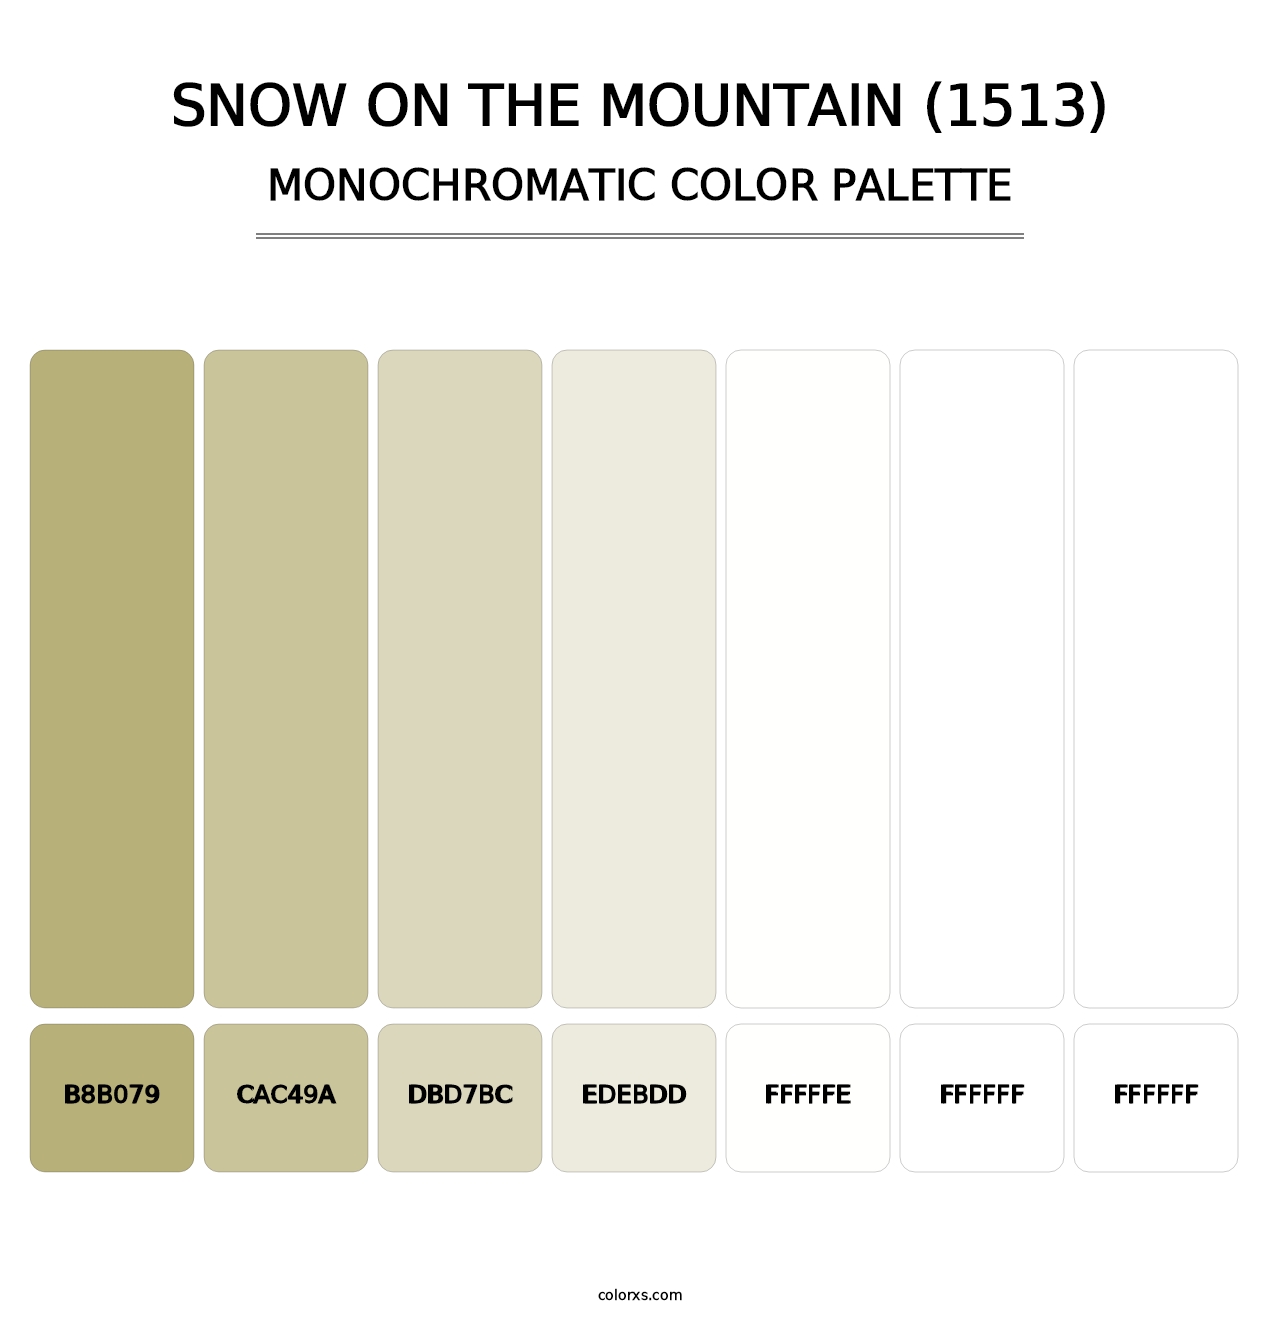 Snow on the Mountain (1513) - Monochromatic Color Palette